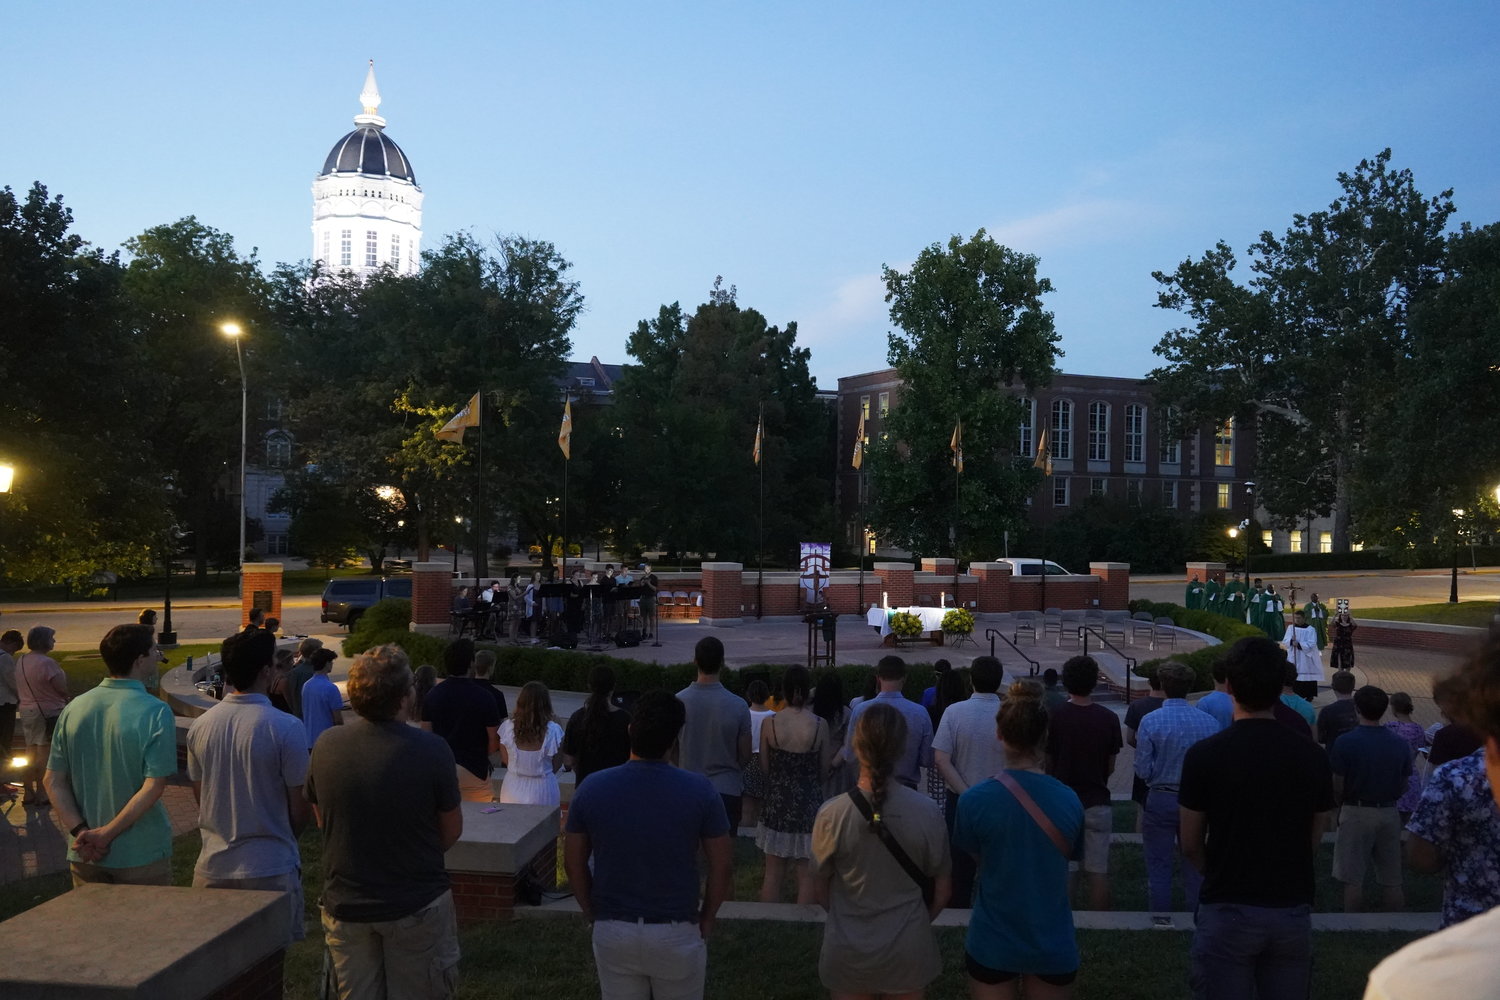 Concelebrating priests process into Traditions Plaza for the Mass on the Quad, a beloved tradition organized by the St. Thomas More Newman Center Parish’s campus ministry department and parishioners.